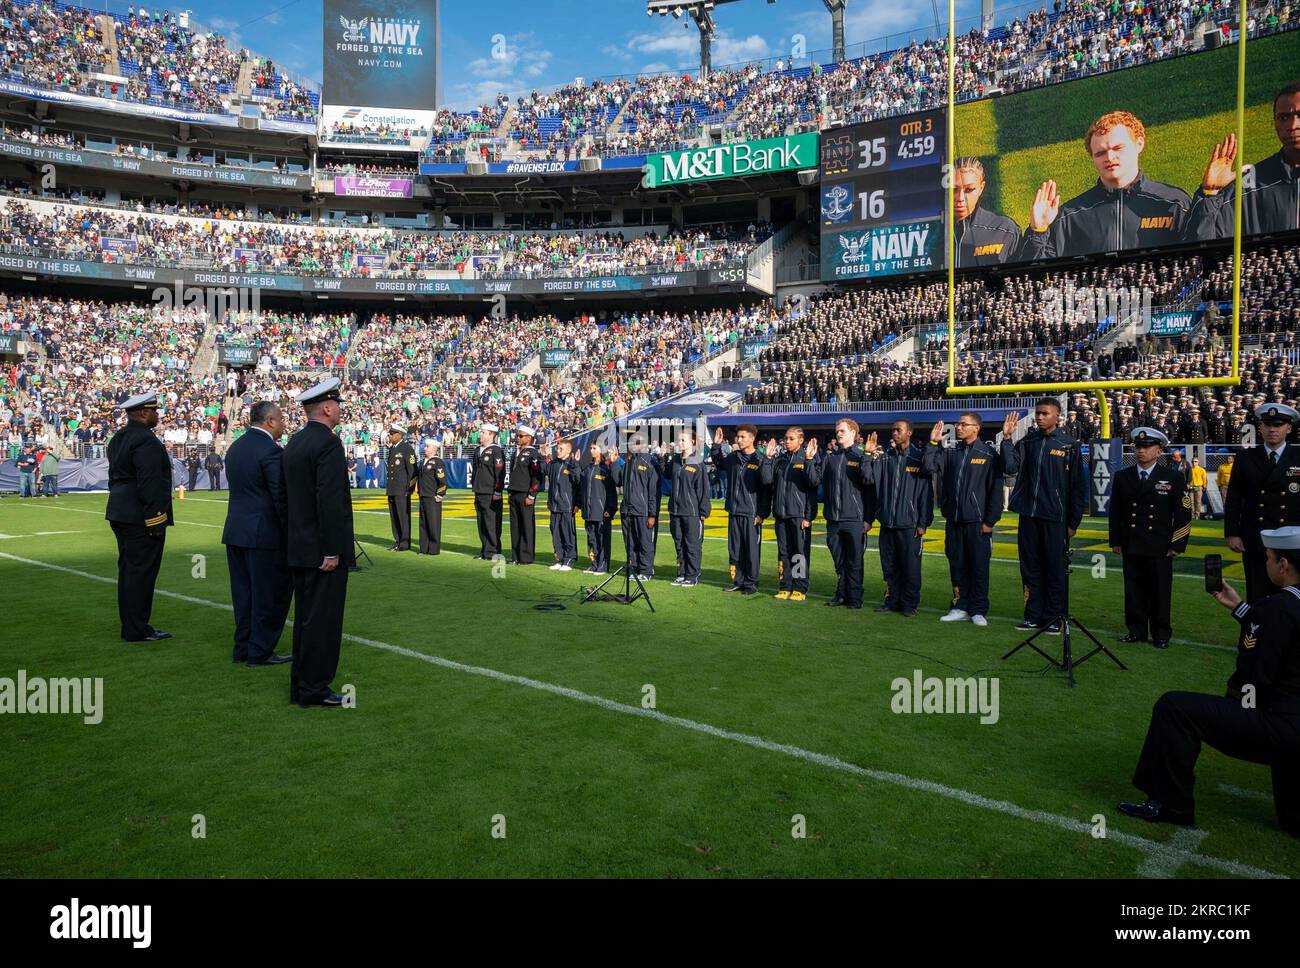 221112-N-WF272-2400 BALTIMORE (Nov. 12, 2022) U.S. Secretary of the Navy Carlos Del Toro administers the oath of enlistment to future U.S. Navy Sailors, recruited by Navy Talent Acquisition Group Philadelphia, during the Navy-Notre Dame football game held at M&T Bank Stadium in Baltimore, Nov. 12, 2022. The game marked the 23rd time the city of Baltimore has hosted a Navy-Notre Dame game and the first since 2008. NTAG Philadelphia encompasses regions of Pennsylvania, New Jersey, Delaware, Maryland and West Virginia, providing recruiting services from more than 30 talent acquisition sites with Stock Photo